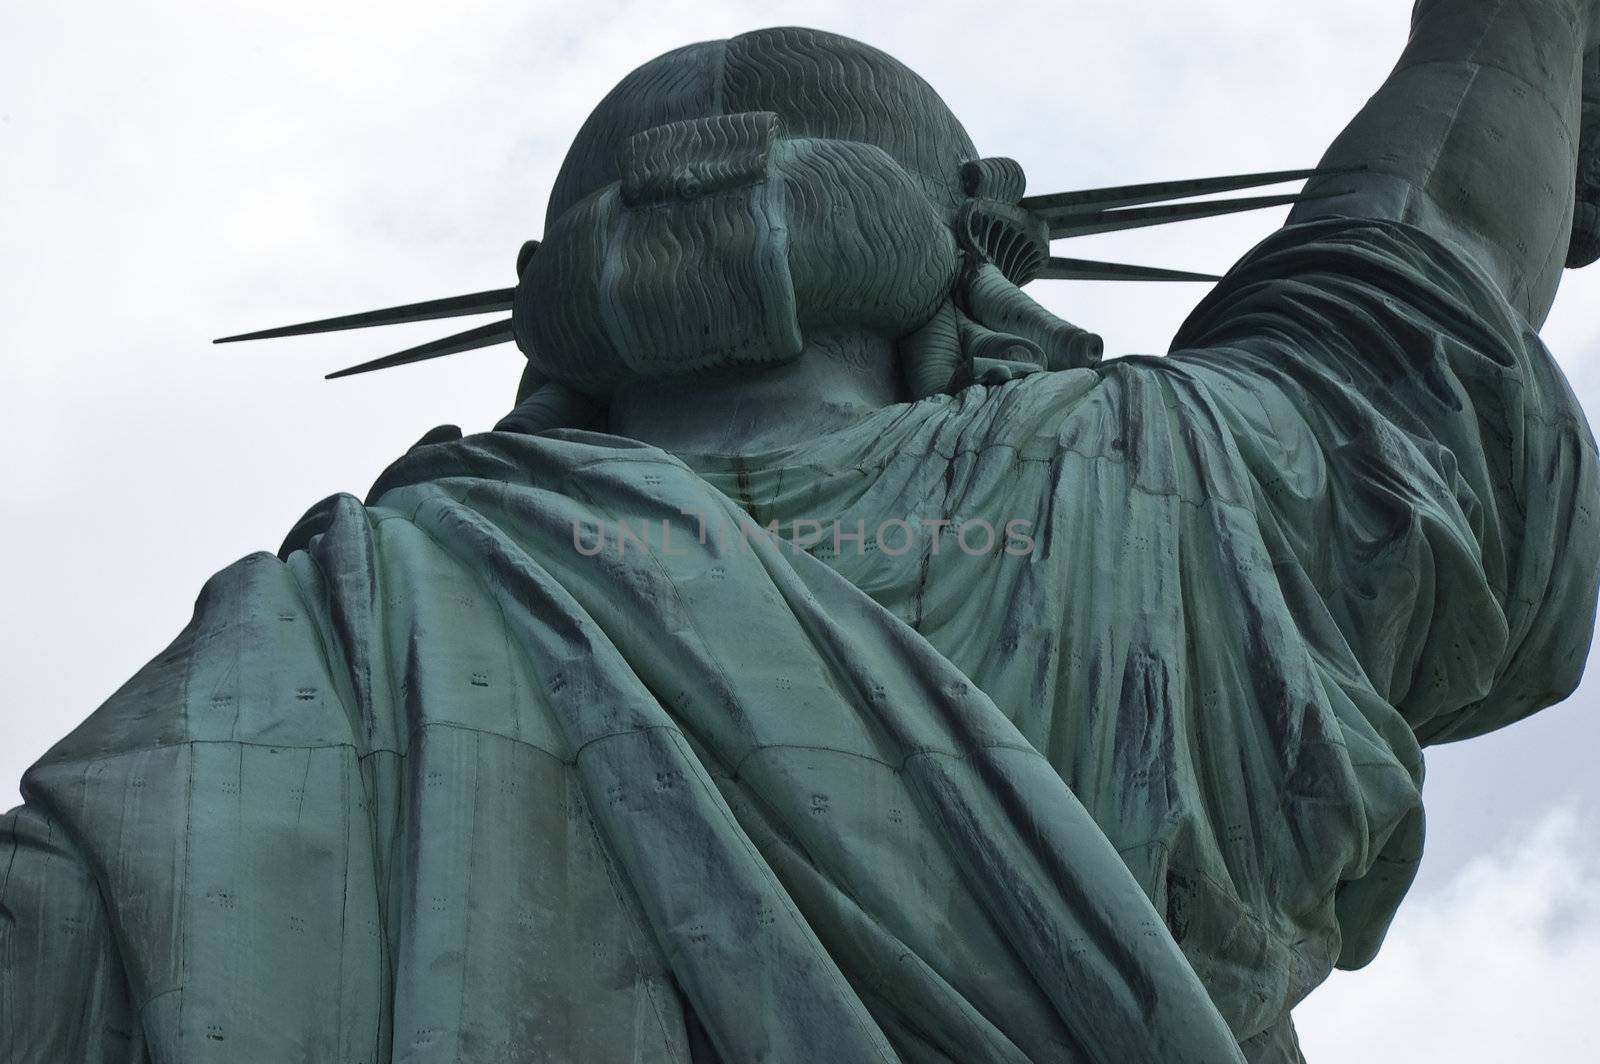 Close-up, upper section, Statue of Liberty from back showing head and part of right arm against the sky, New York City, USA